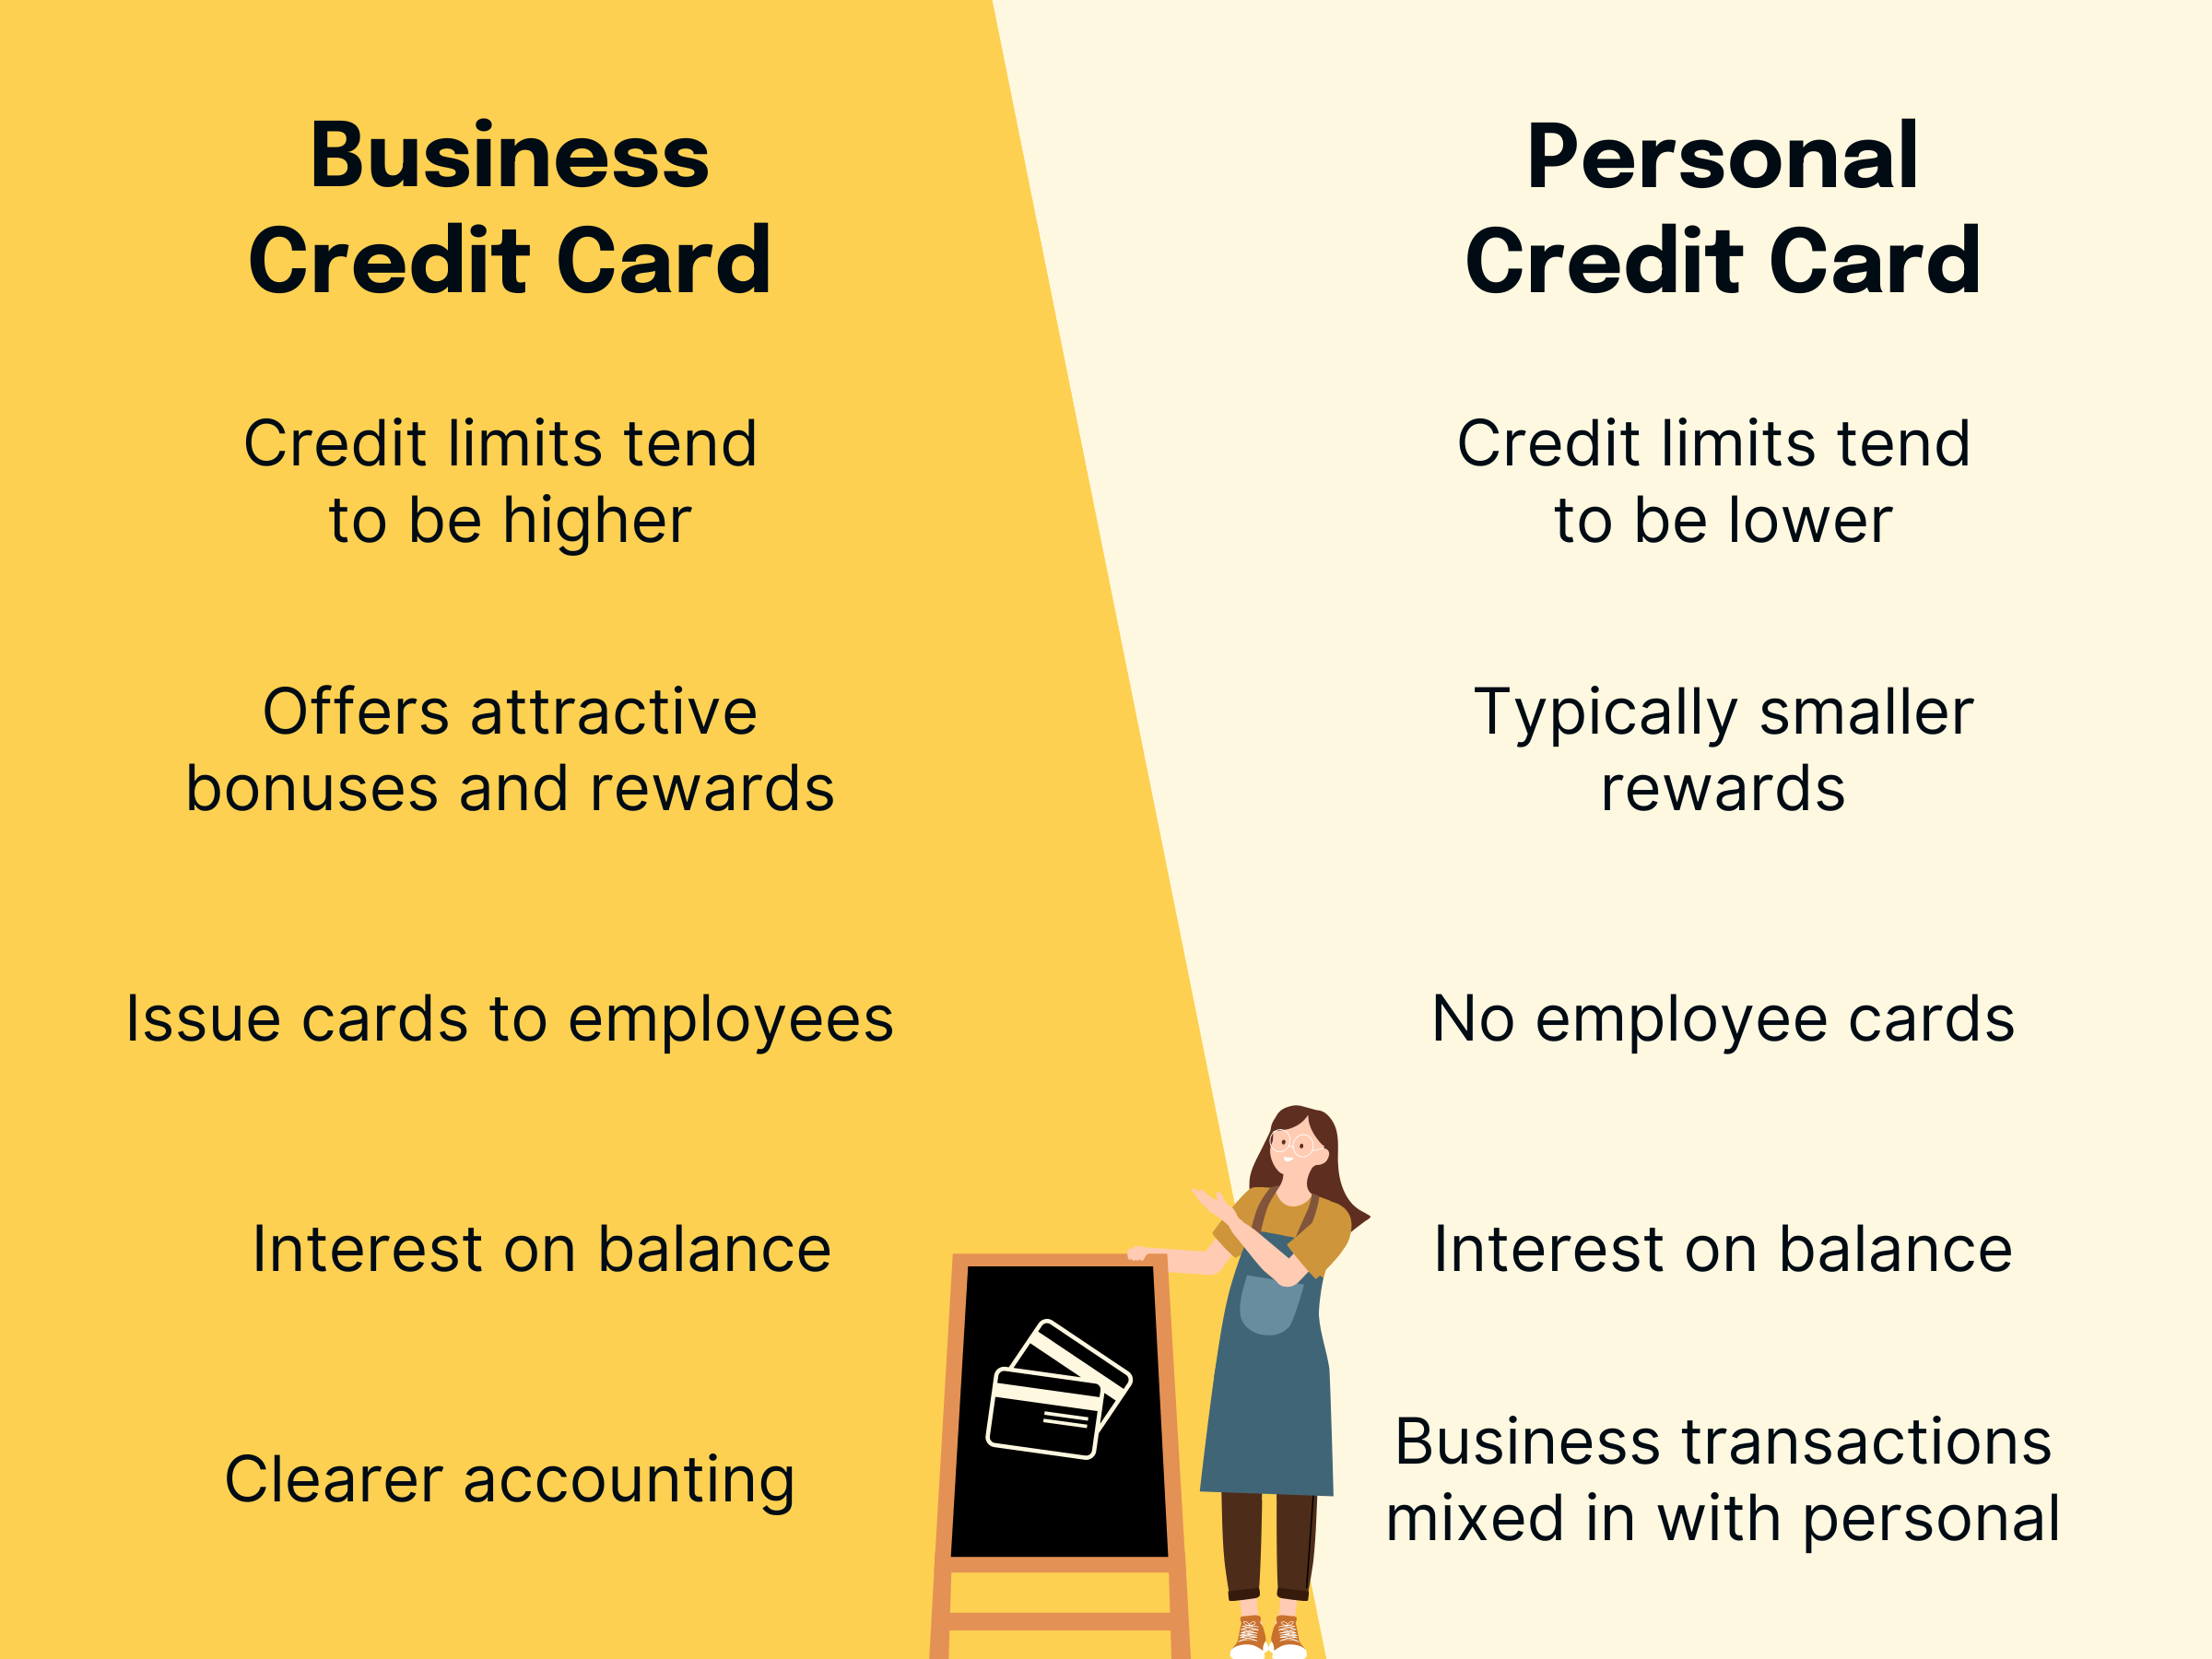 A graphic showing the similarities and differences of business credit cards and personal credit cards